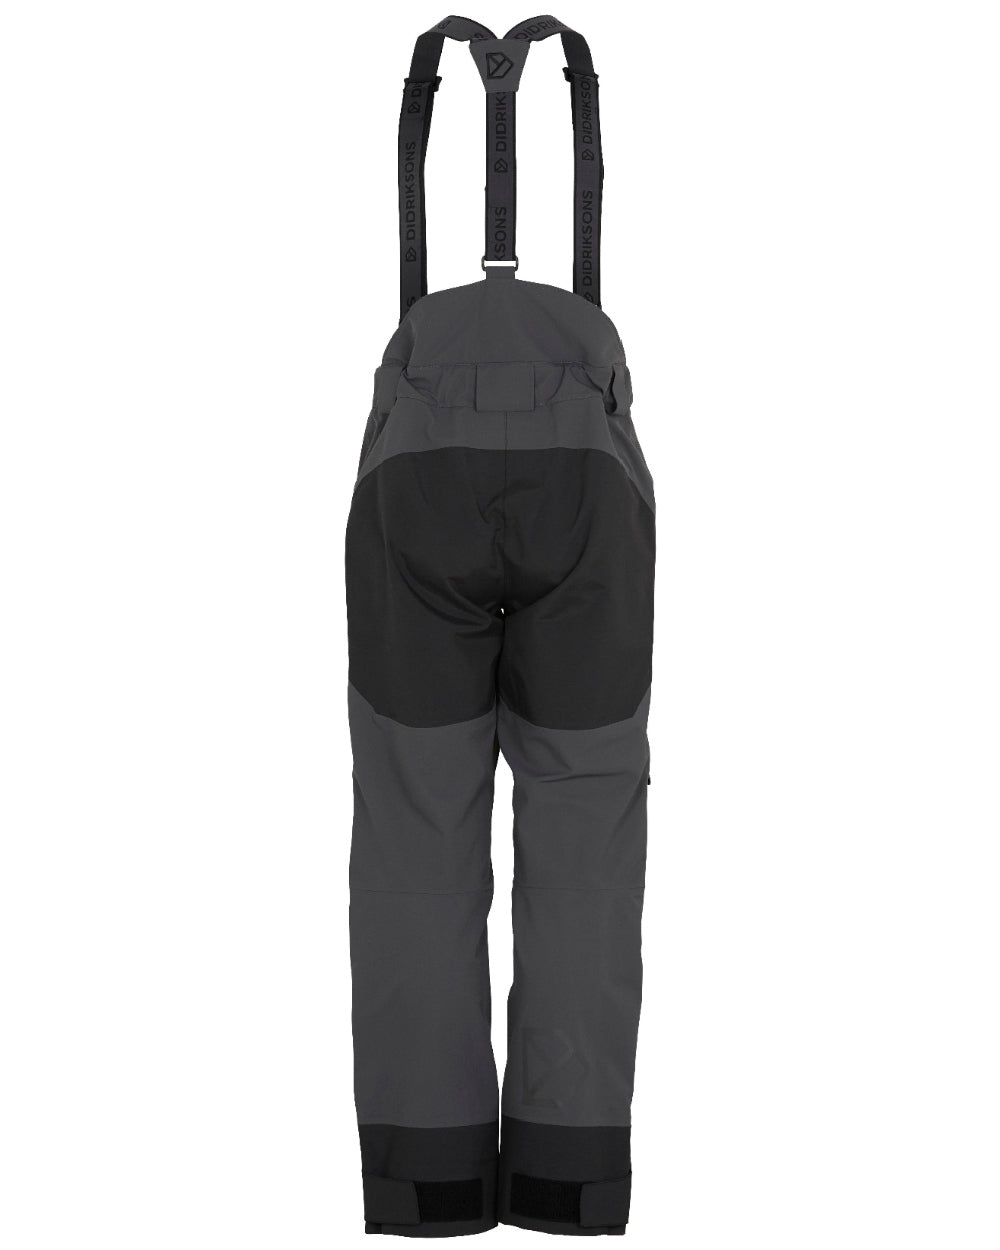 Coal Black Coloured Didriksons Fractus Pant On A White Background